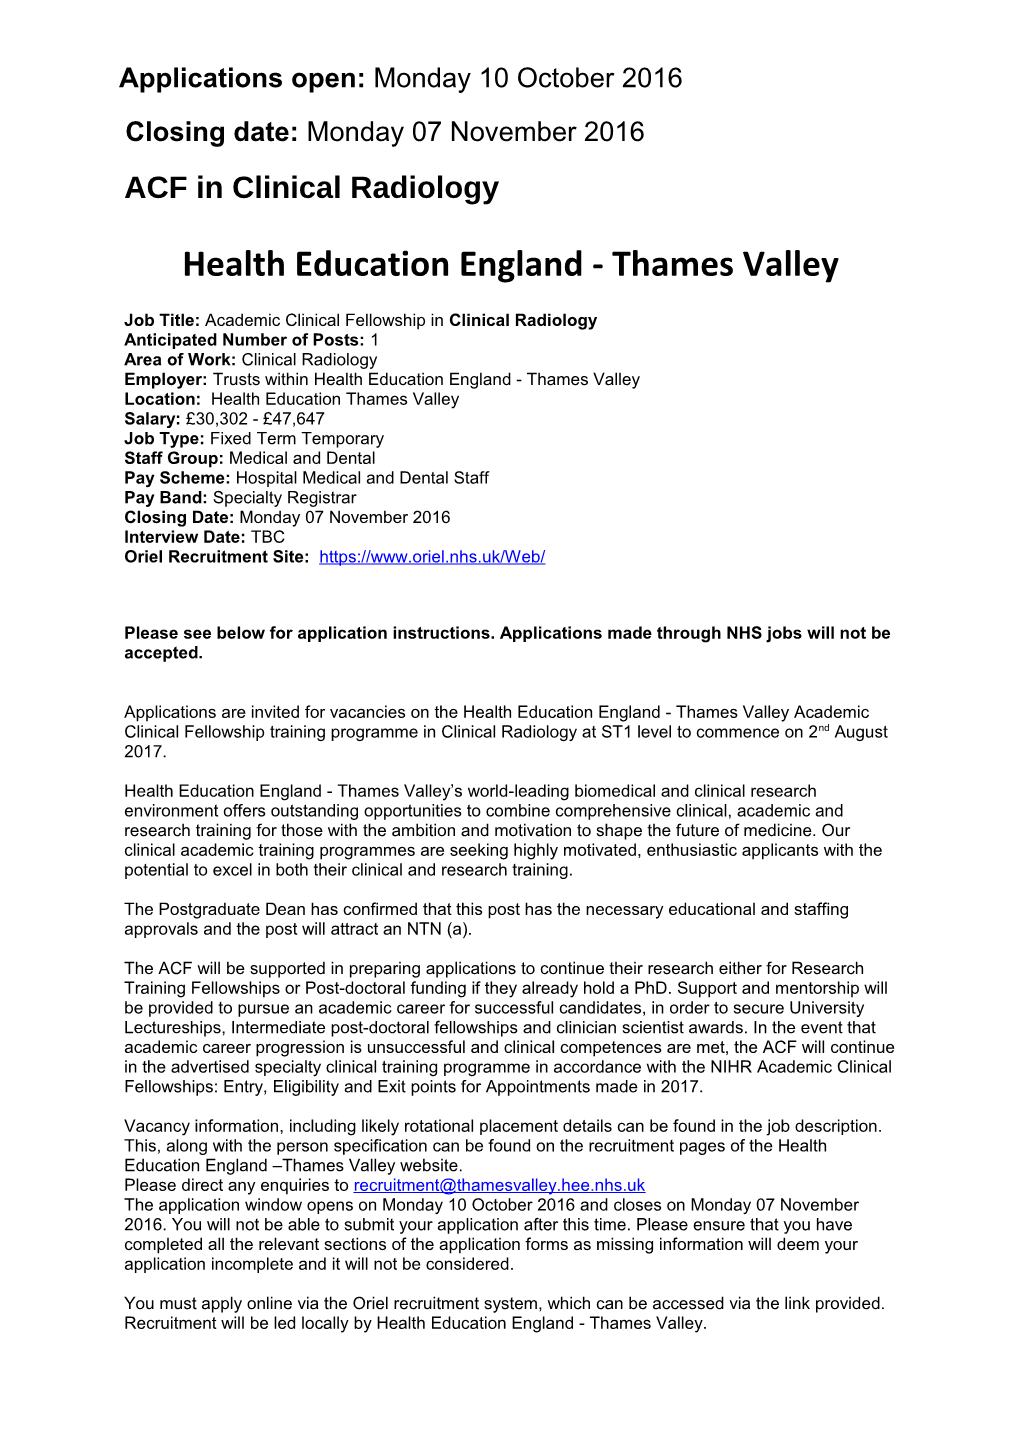 Health Education England - Thames Valley